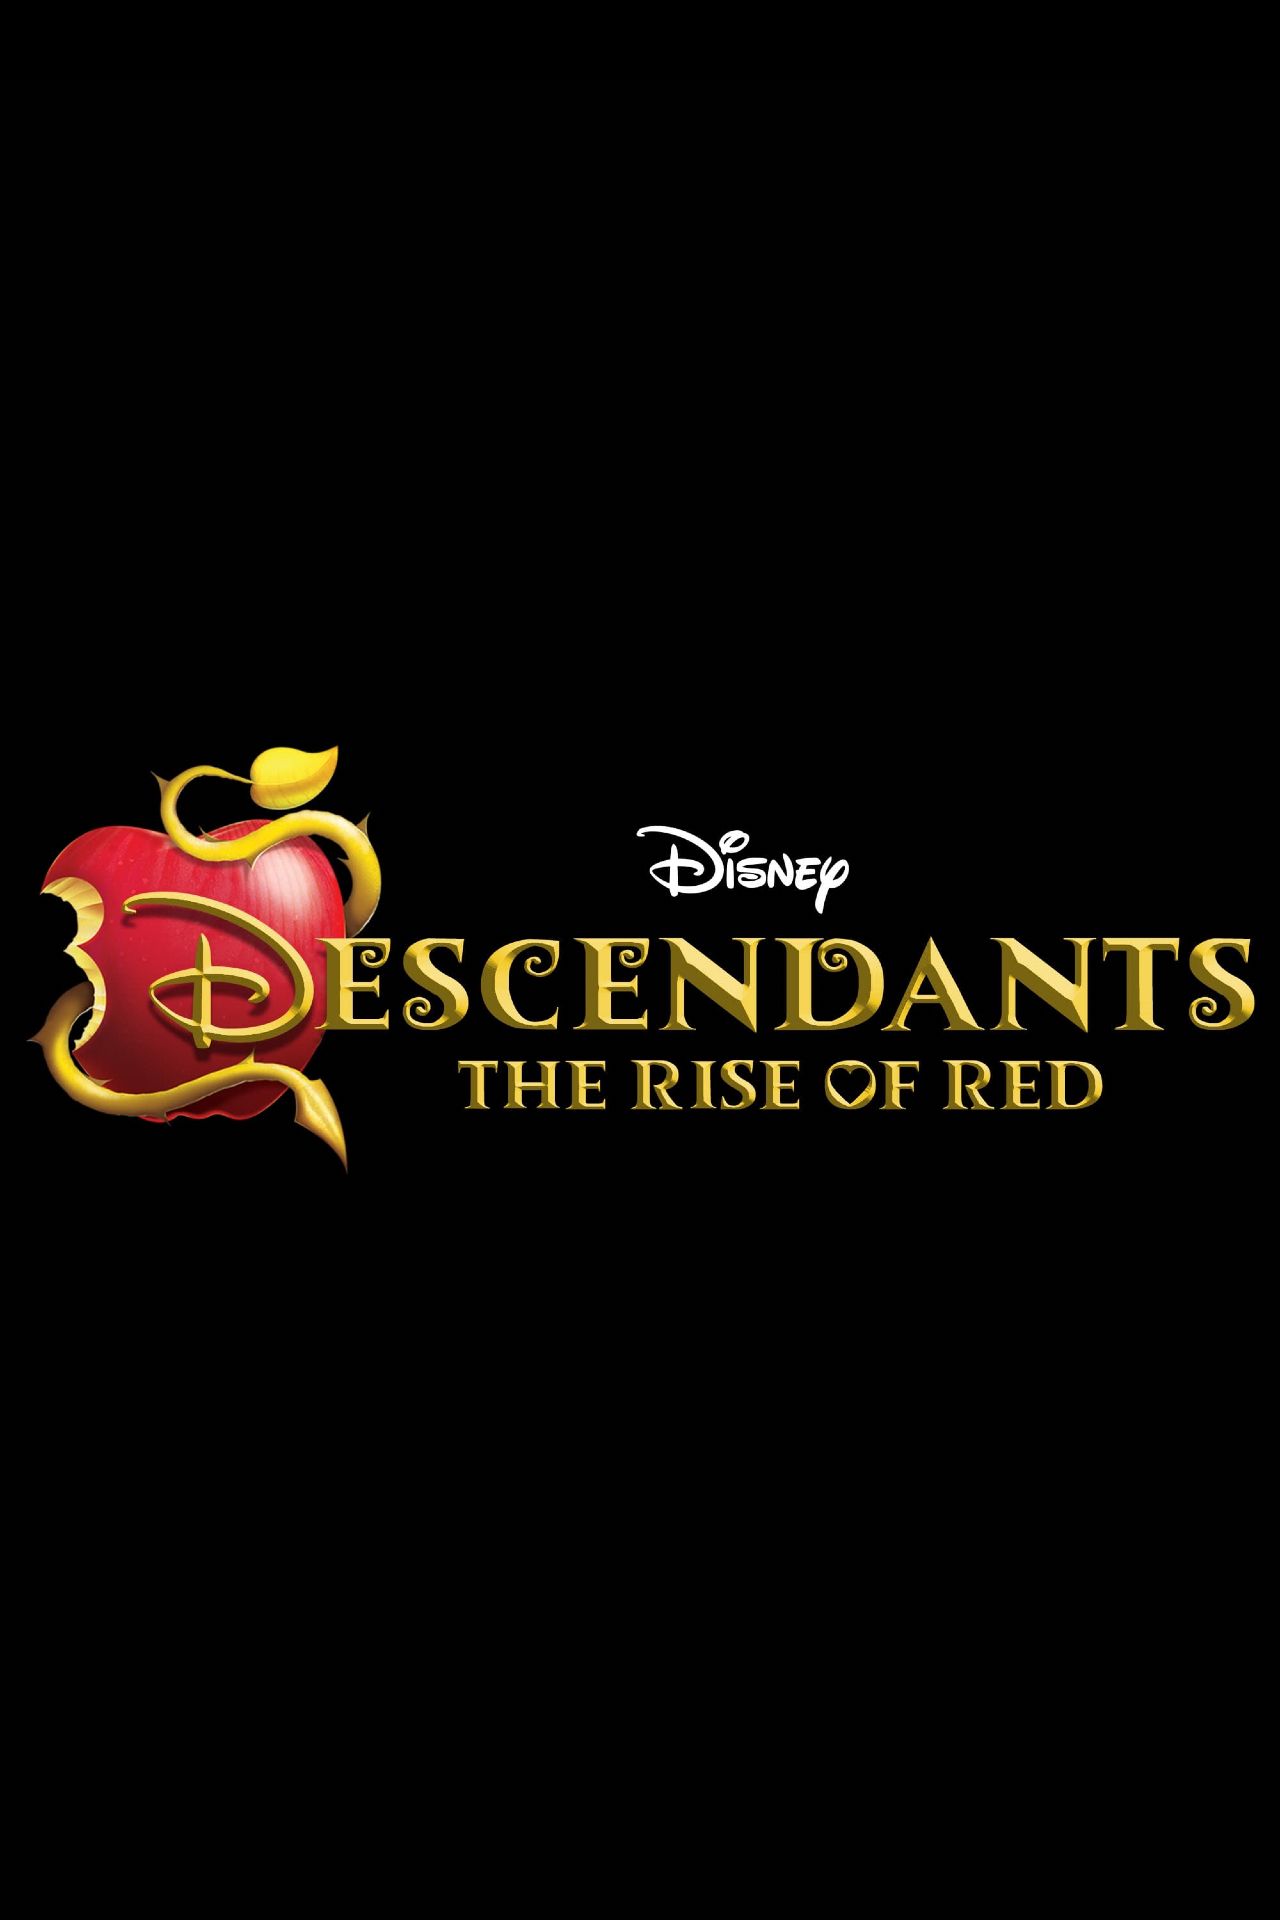 Descendants The Rise of Red Movie Logo Poster